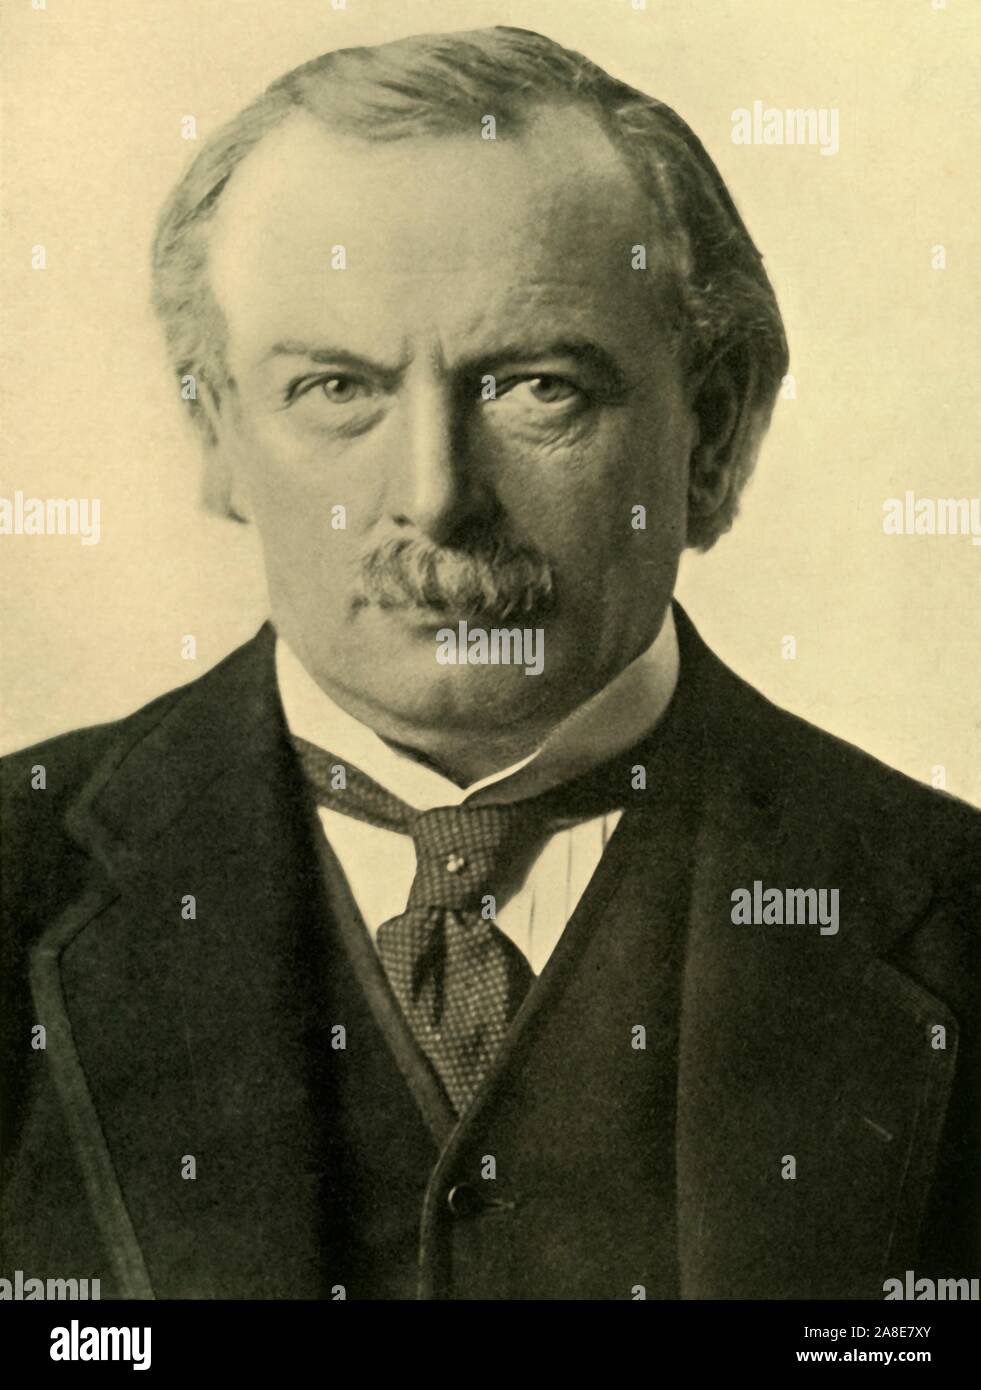 'The Right Hon. David Lloyd George, Prime Minister and First Lord of the Treasury', c1918, (c1920). Portrait of David Lloyd-George (1863-1945) British prime minister between 1916 and 1922. On 11 November 1918, he announced: 'The armistice was signed at five o'clock this morning, and hostilities are to cease on all fronts at 11 a.m. to-day'. The armistice signalled the end of the First World War. From &quot;The Great World War: A History&quot;, Volume IX, edited by Frank A Mumby. [The Gresham Publishing Company Ltd, London, c1920] Stock Photo